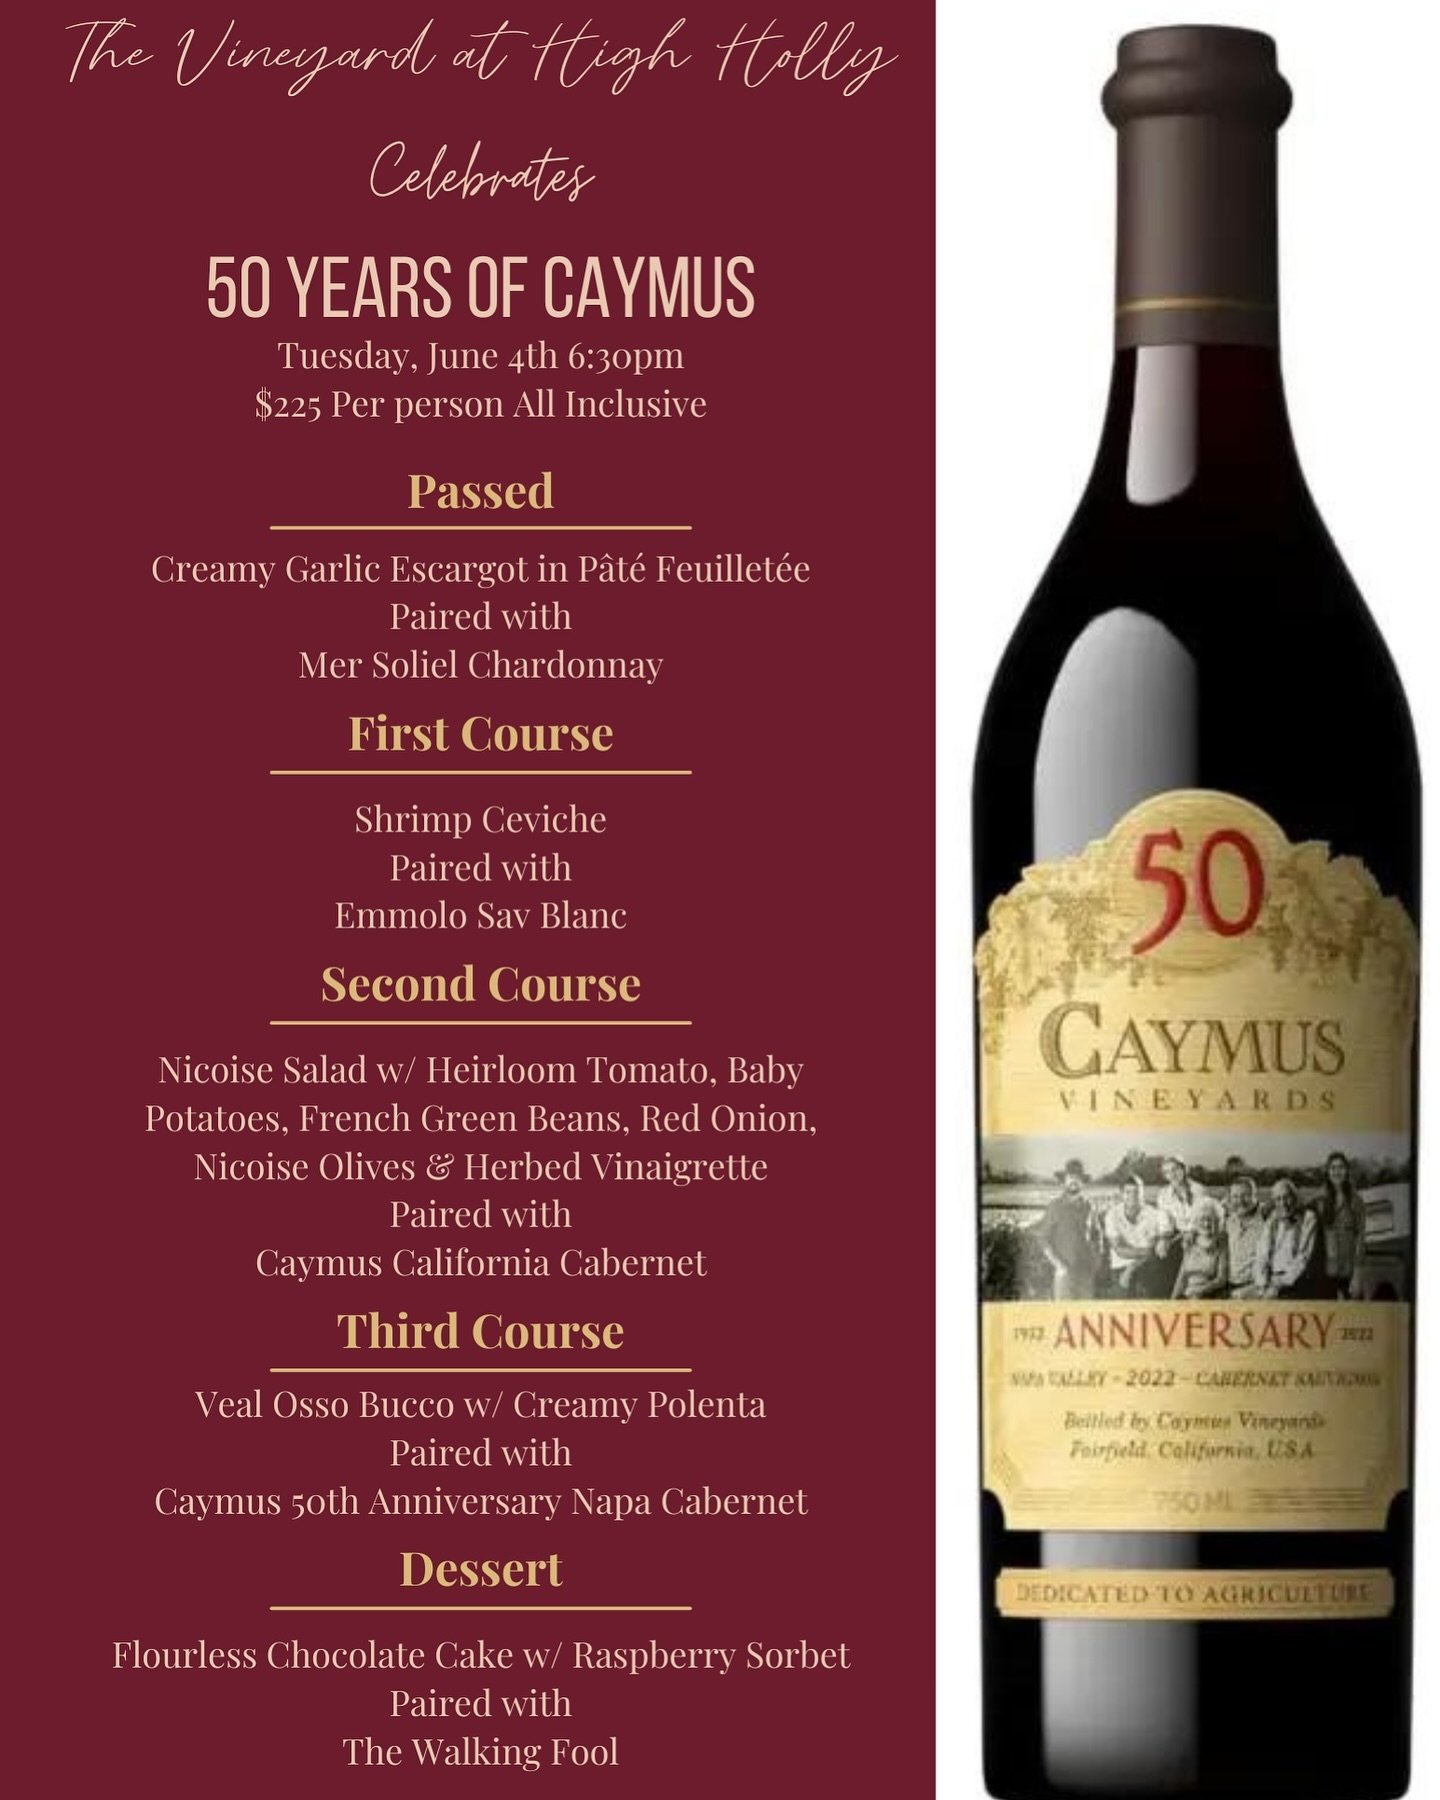 Toast to 50 years of Caymus Vineyards! 🍷 Join us for an unforgettable wine dinner at the picturesque Vineyard at High Holly as we celebrate half a century of exquisite wine-making. Cheers to memories in the making! 

TUESDAY JUNE 4th 6:30PM
$225 per